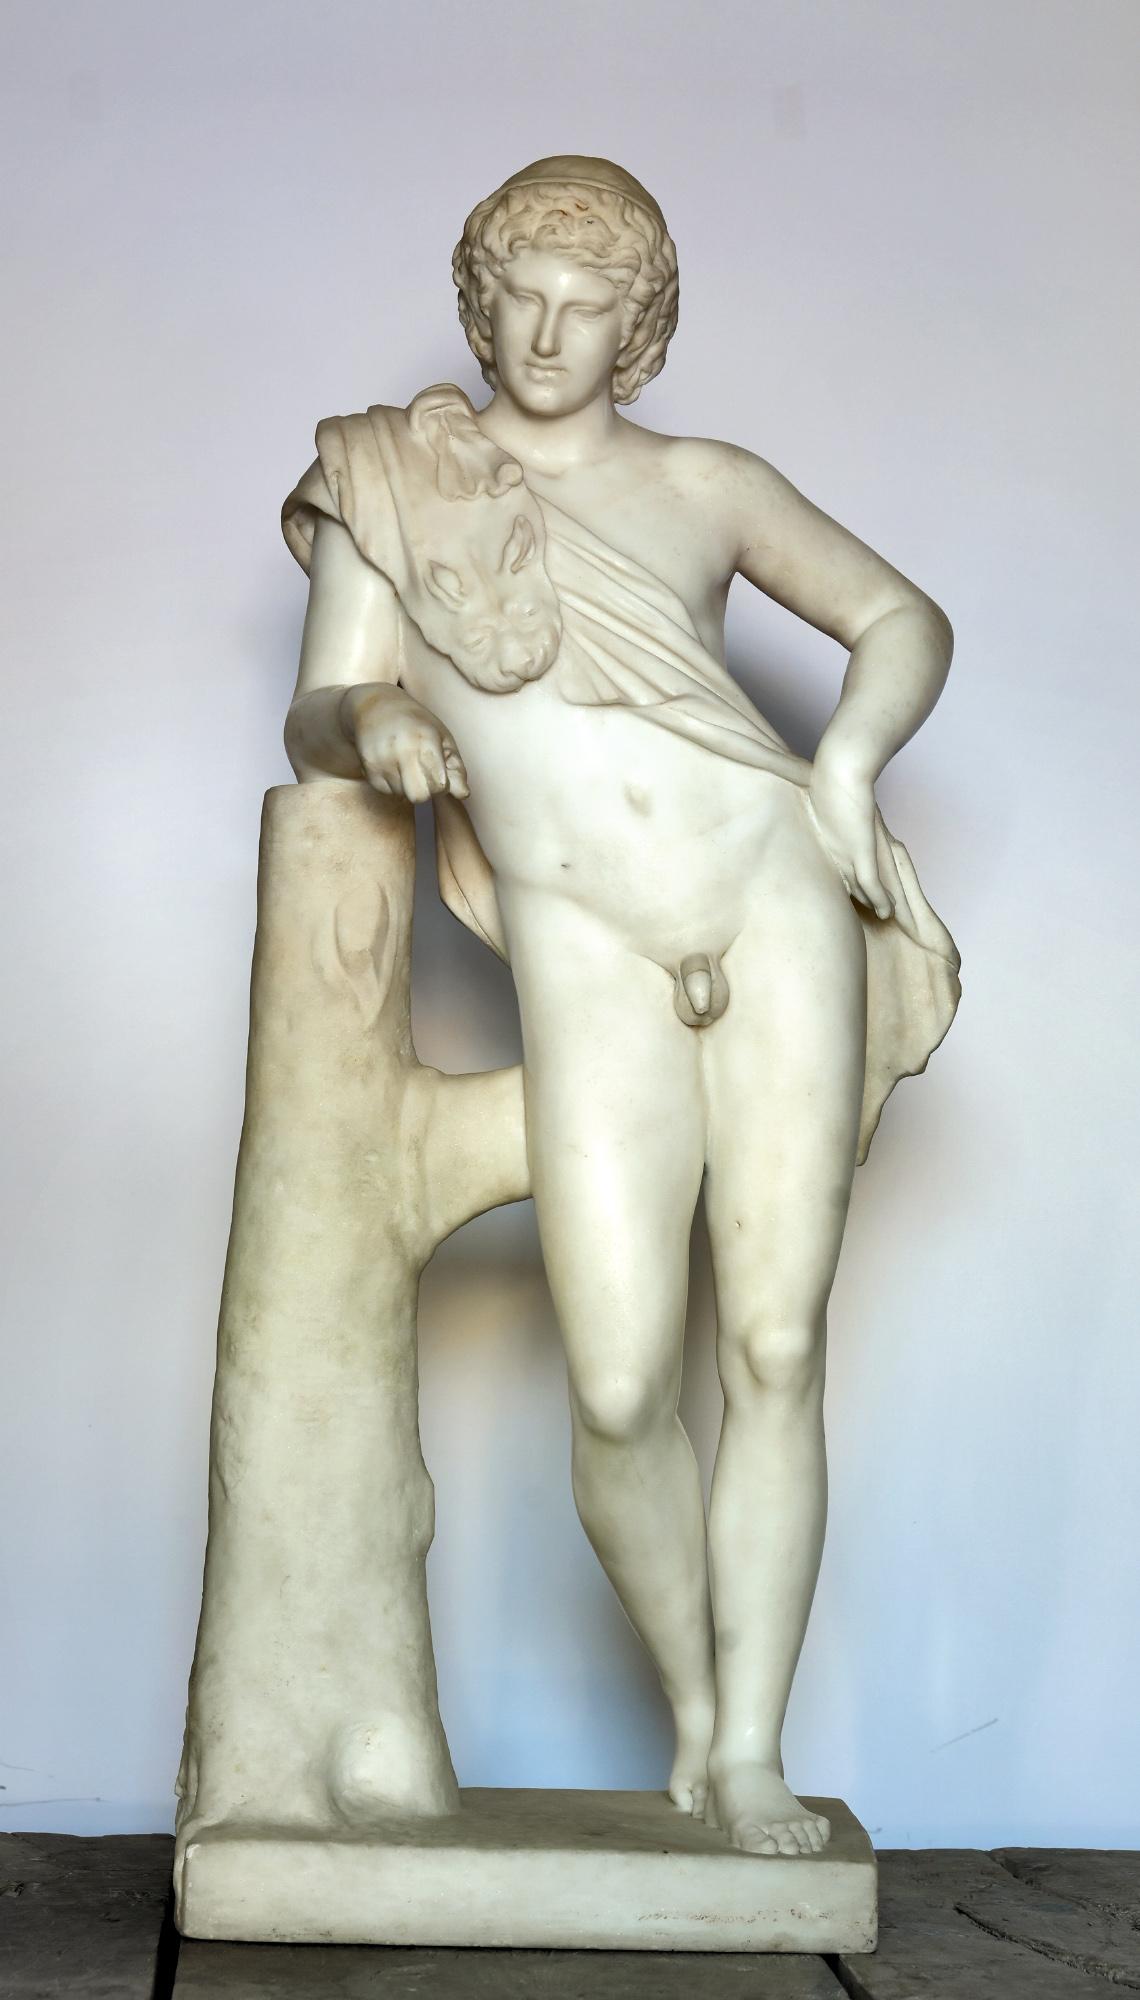 The statue is very fine and in high quality out of Carrara marble. It is worked out around 1800. You can see also an exemplar in the Capitoline Museums out of c. 130 AD

The Resting Satyr statue type shows a youthful satyr, sometimes referred to